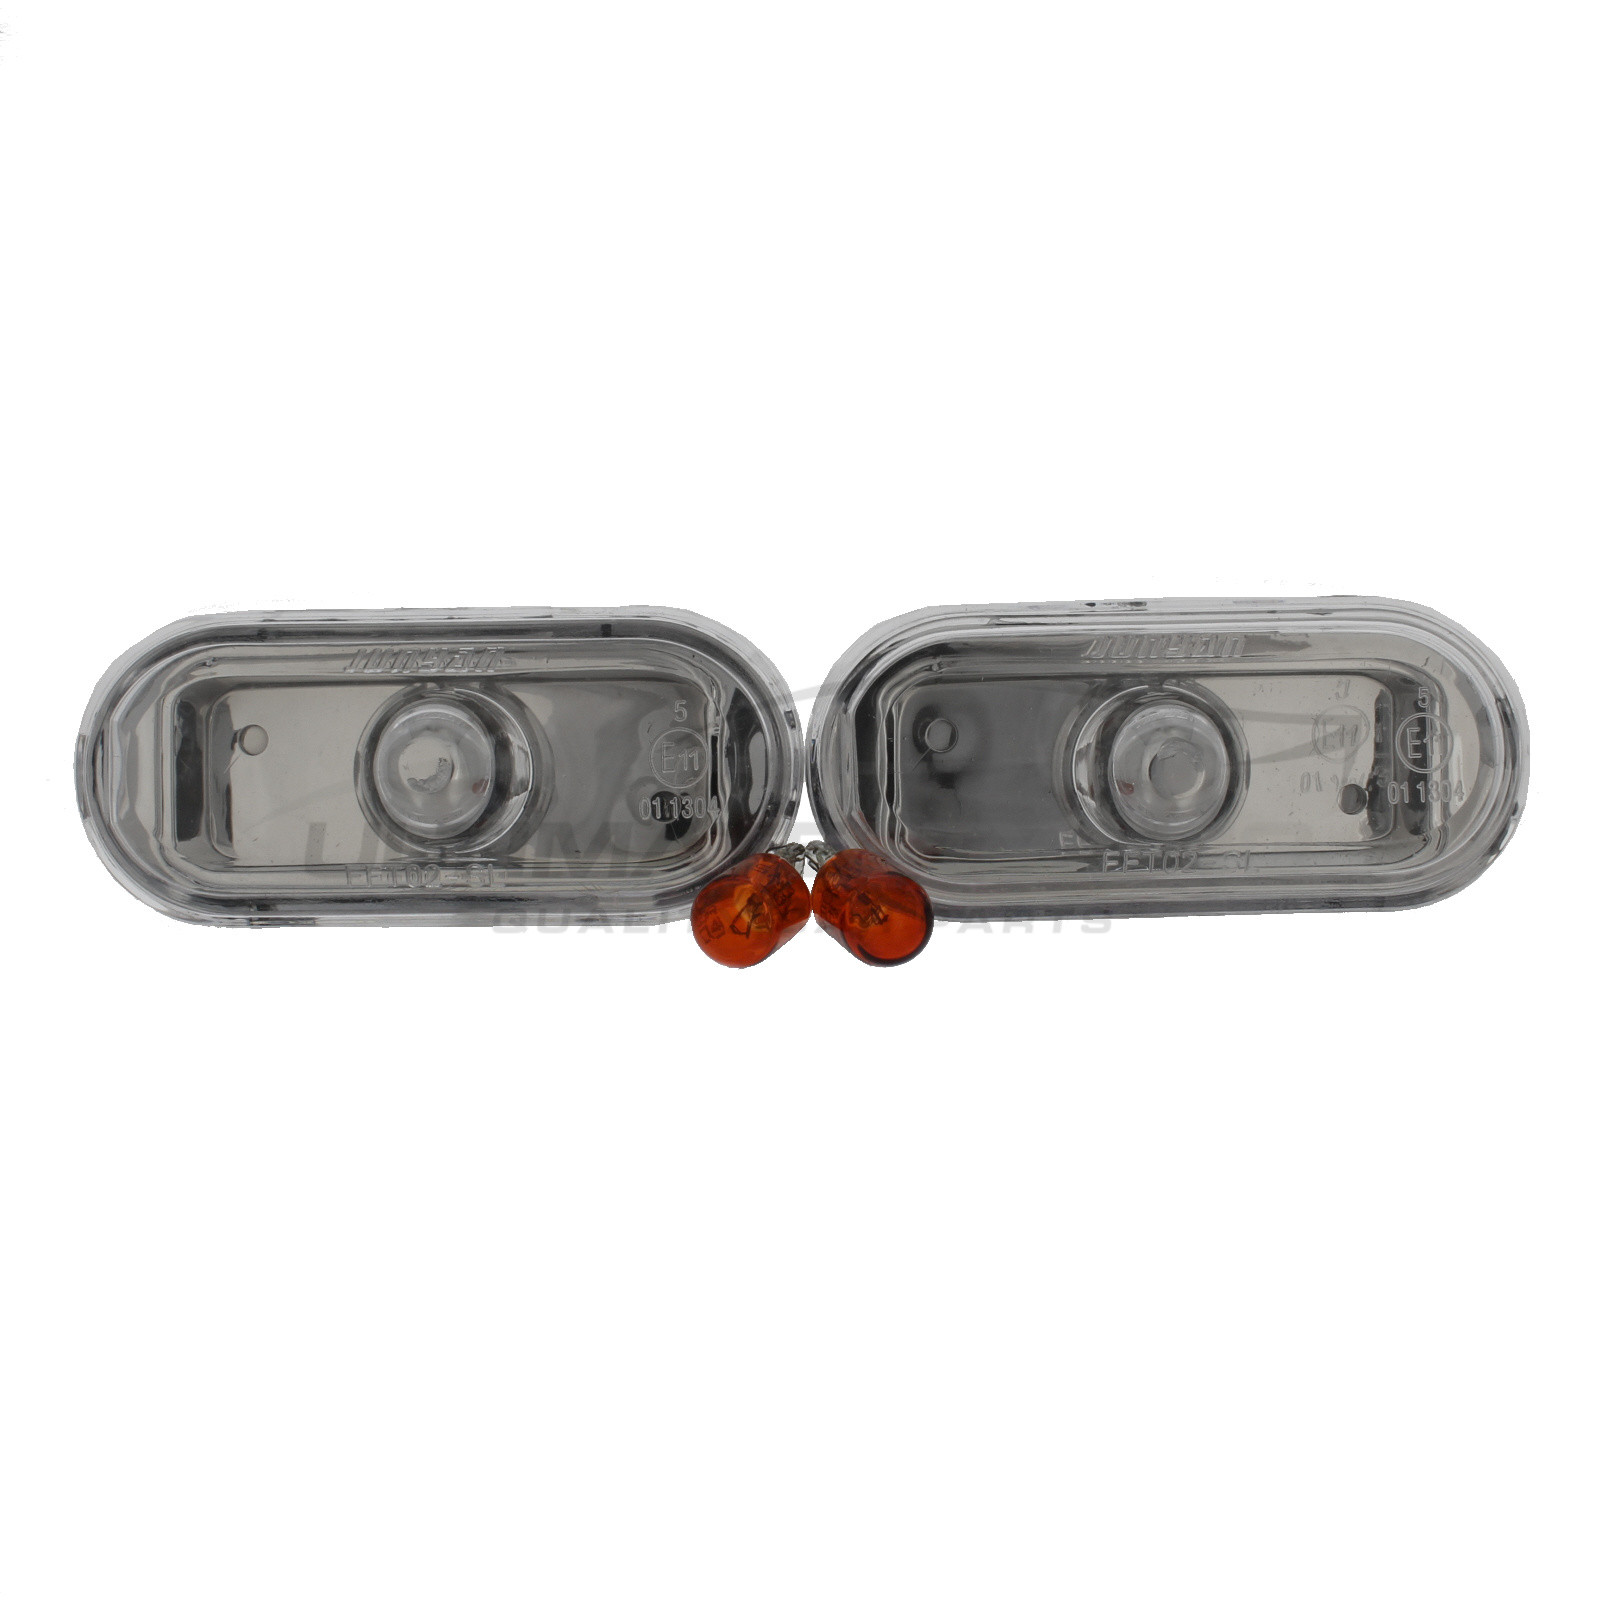 Ford C-MAX / Fiesta / Focus / Focus C-MAX / Fusion Side Repeaters - Pair (LH & RH) - Crystal Clear lens - Non-LED